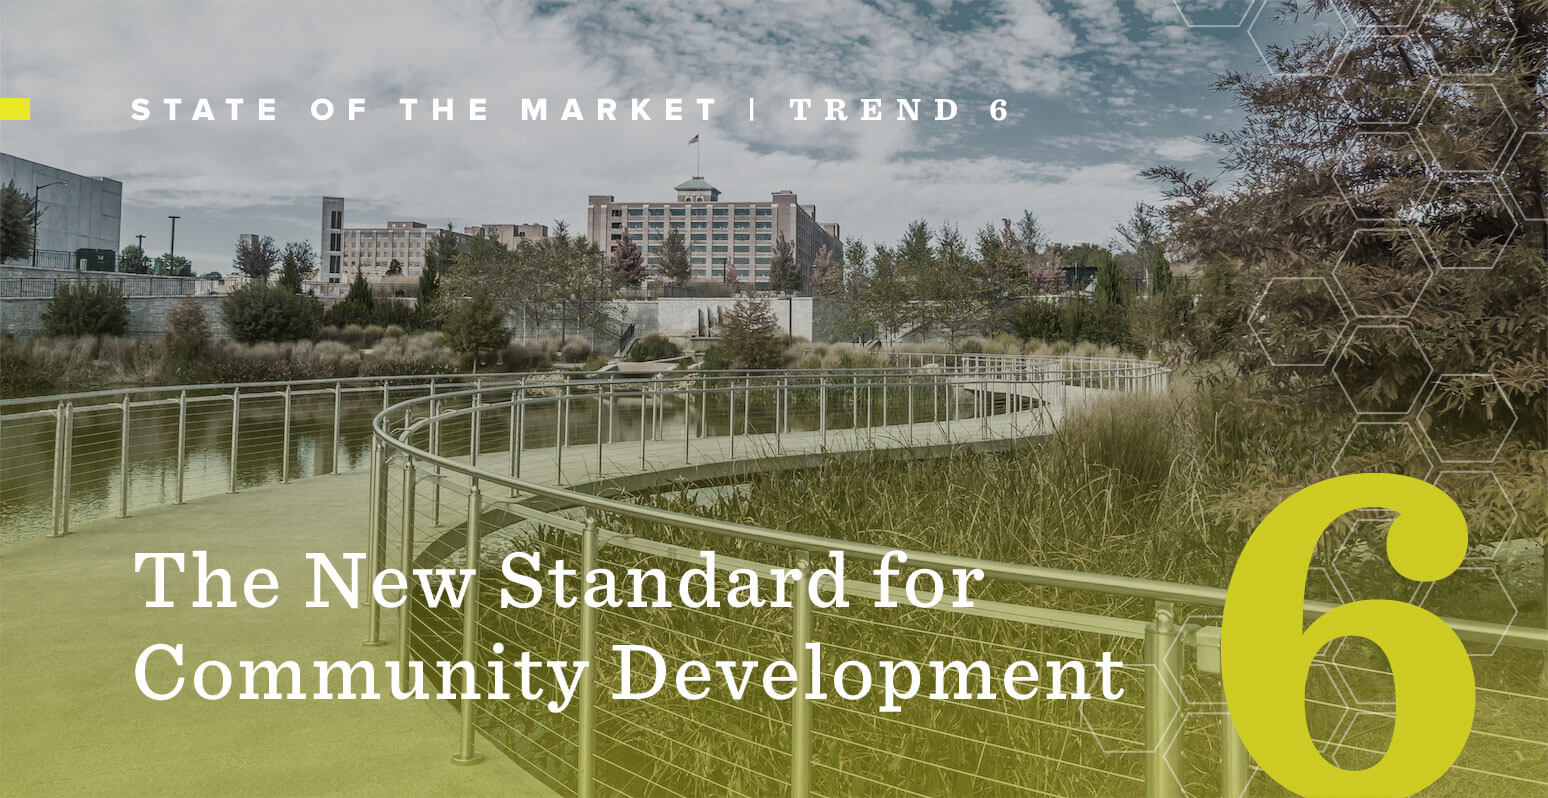 State of the Market: Trend 6 - The New Standard for Community Development